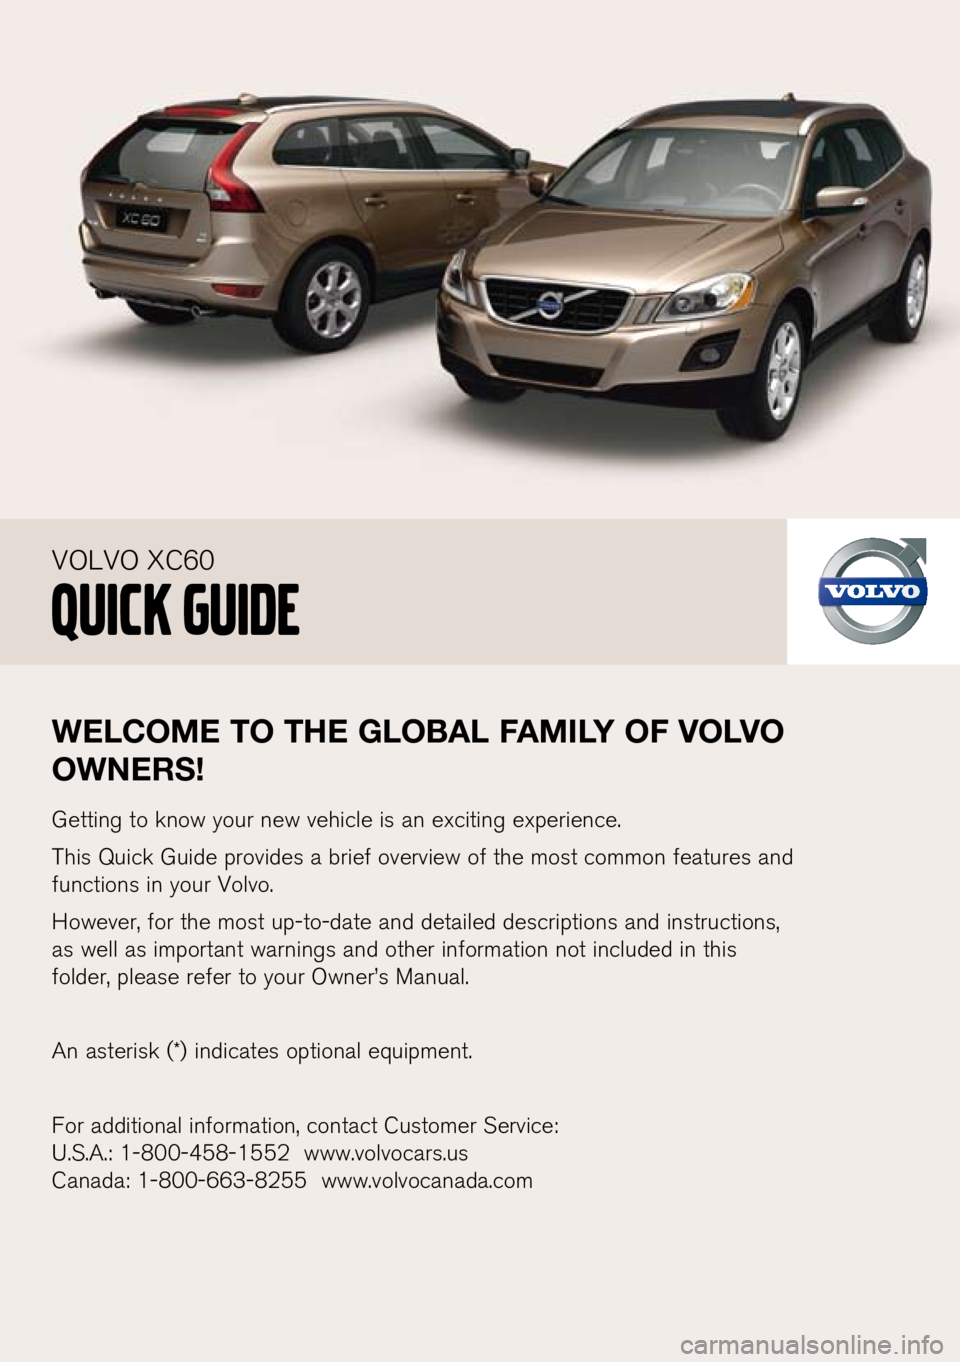 VOLVO XC60 2010  Quick Guide 
weLcome  to the  gLo BaL  fami Ly  of  voLvo 
owners !
Getting to know your new vehicle is an exciting experience.
This Quick Guide provides a brief overview of the most common features and 
function